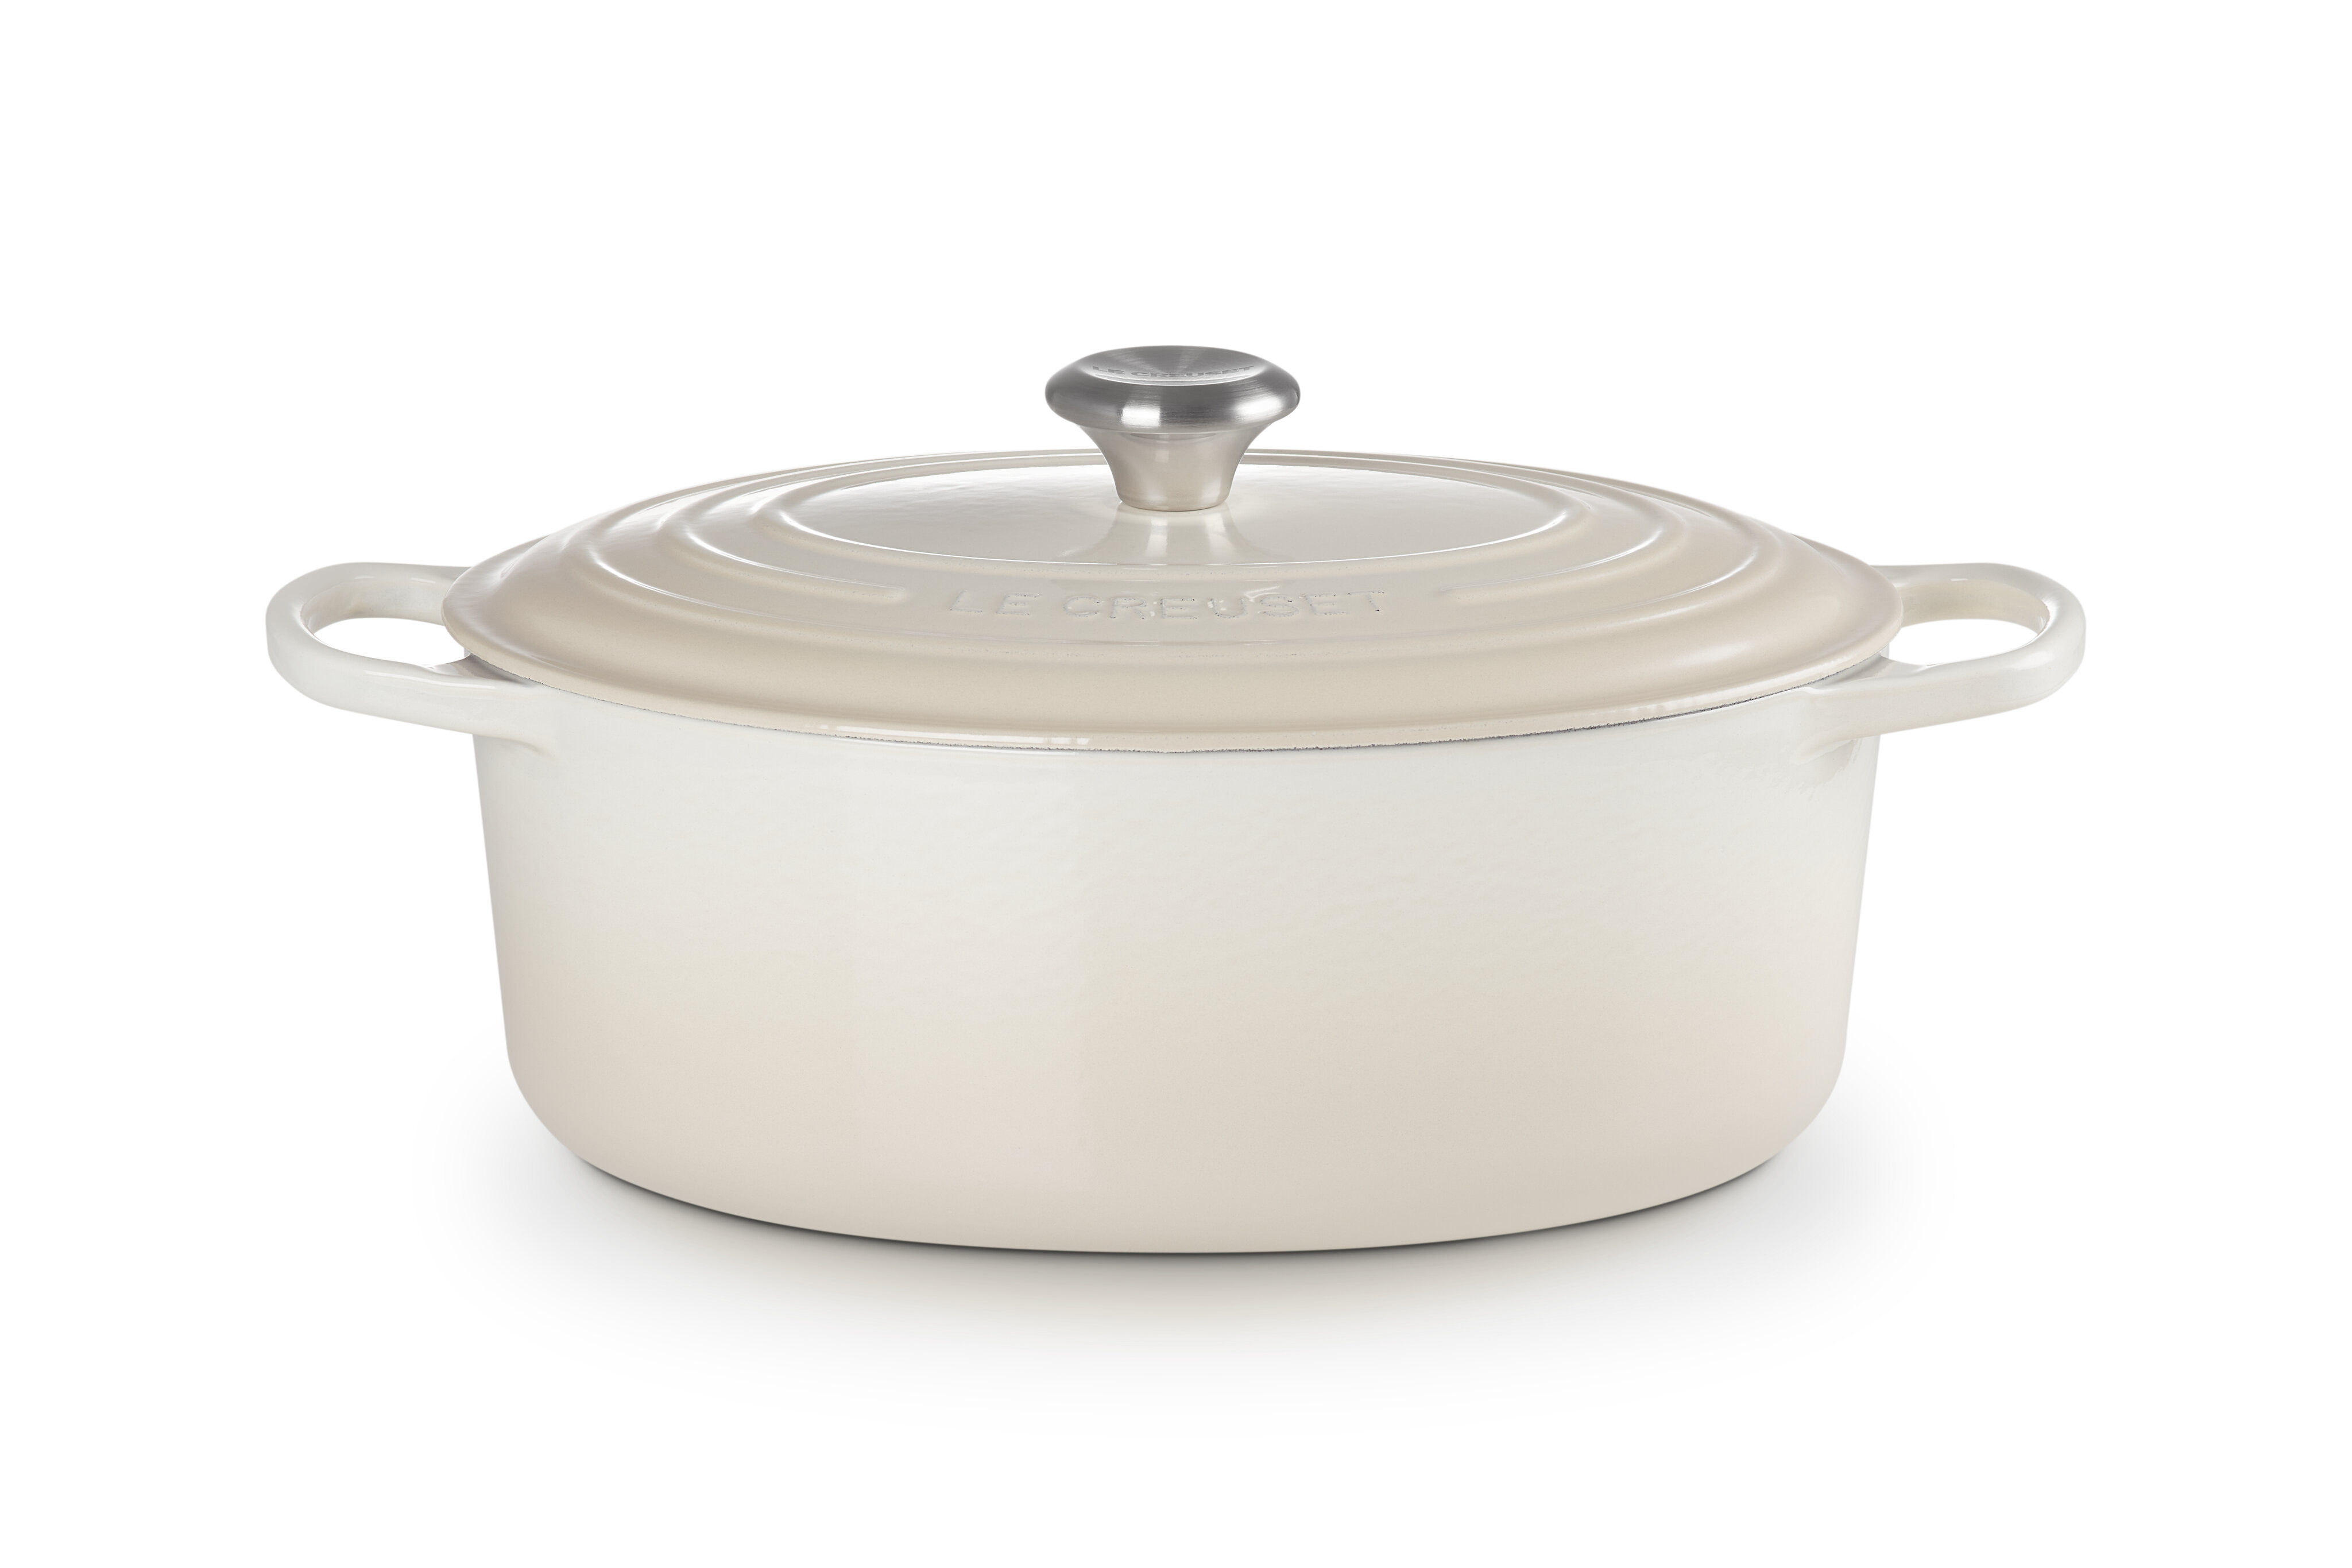 Le Creuset Signature Enameled Cast Iron Oval Dutch Oven with Lid & Reviews